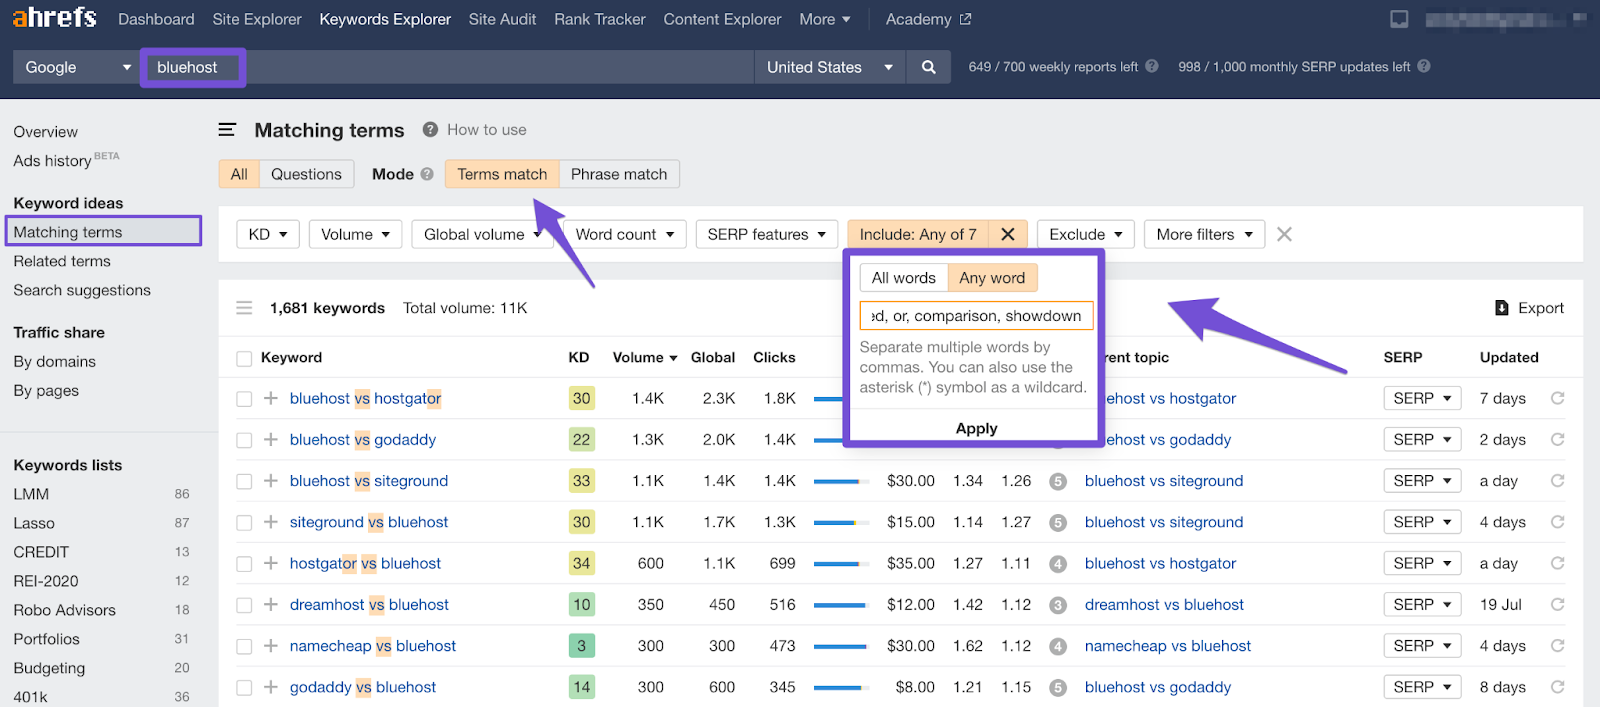 ahrefs terms match report for keyword query bluehost